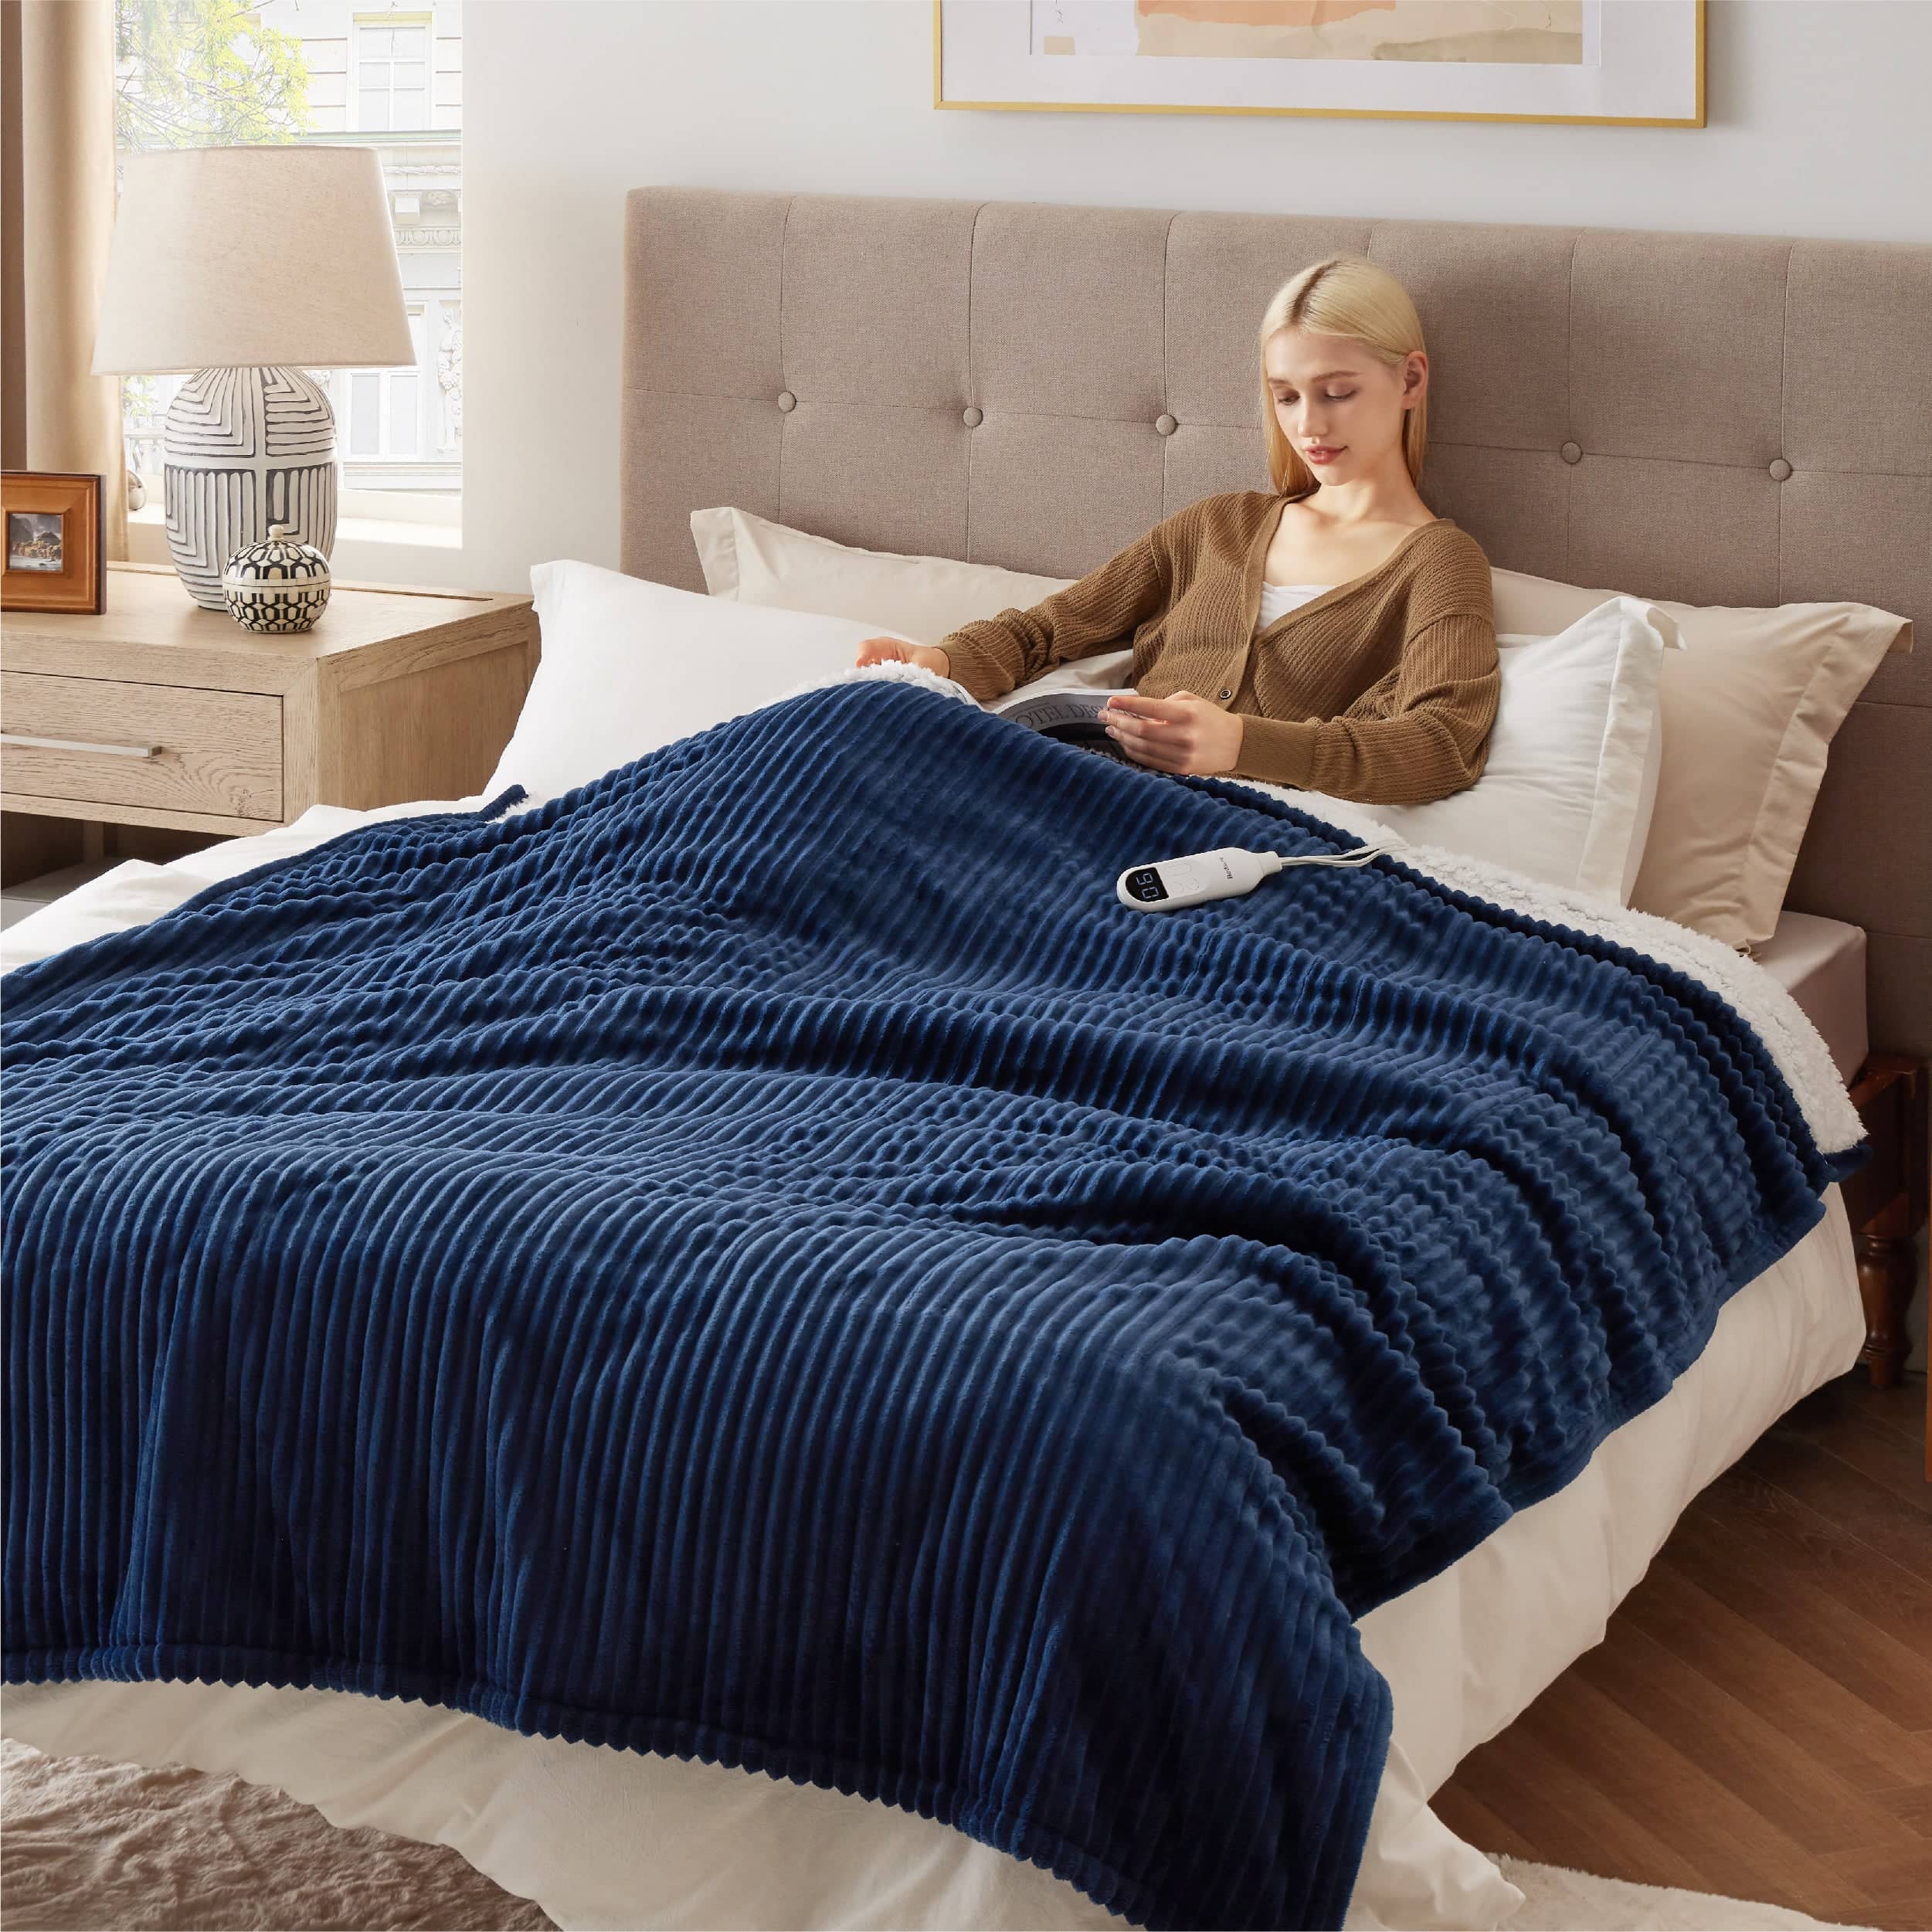 Bedsure Ribbed Flannel Heated Blanket